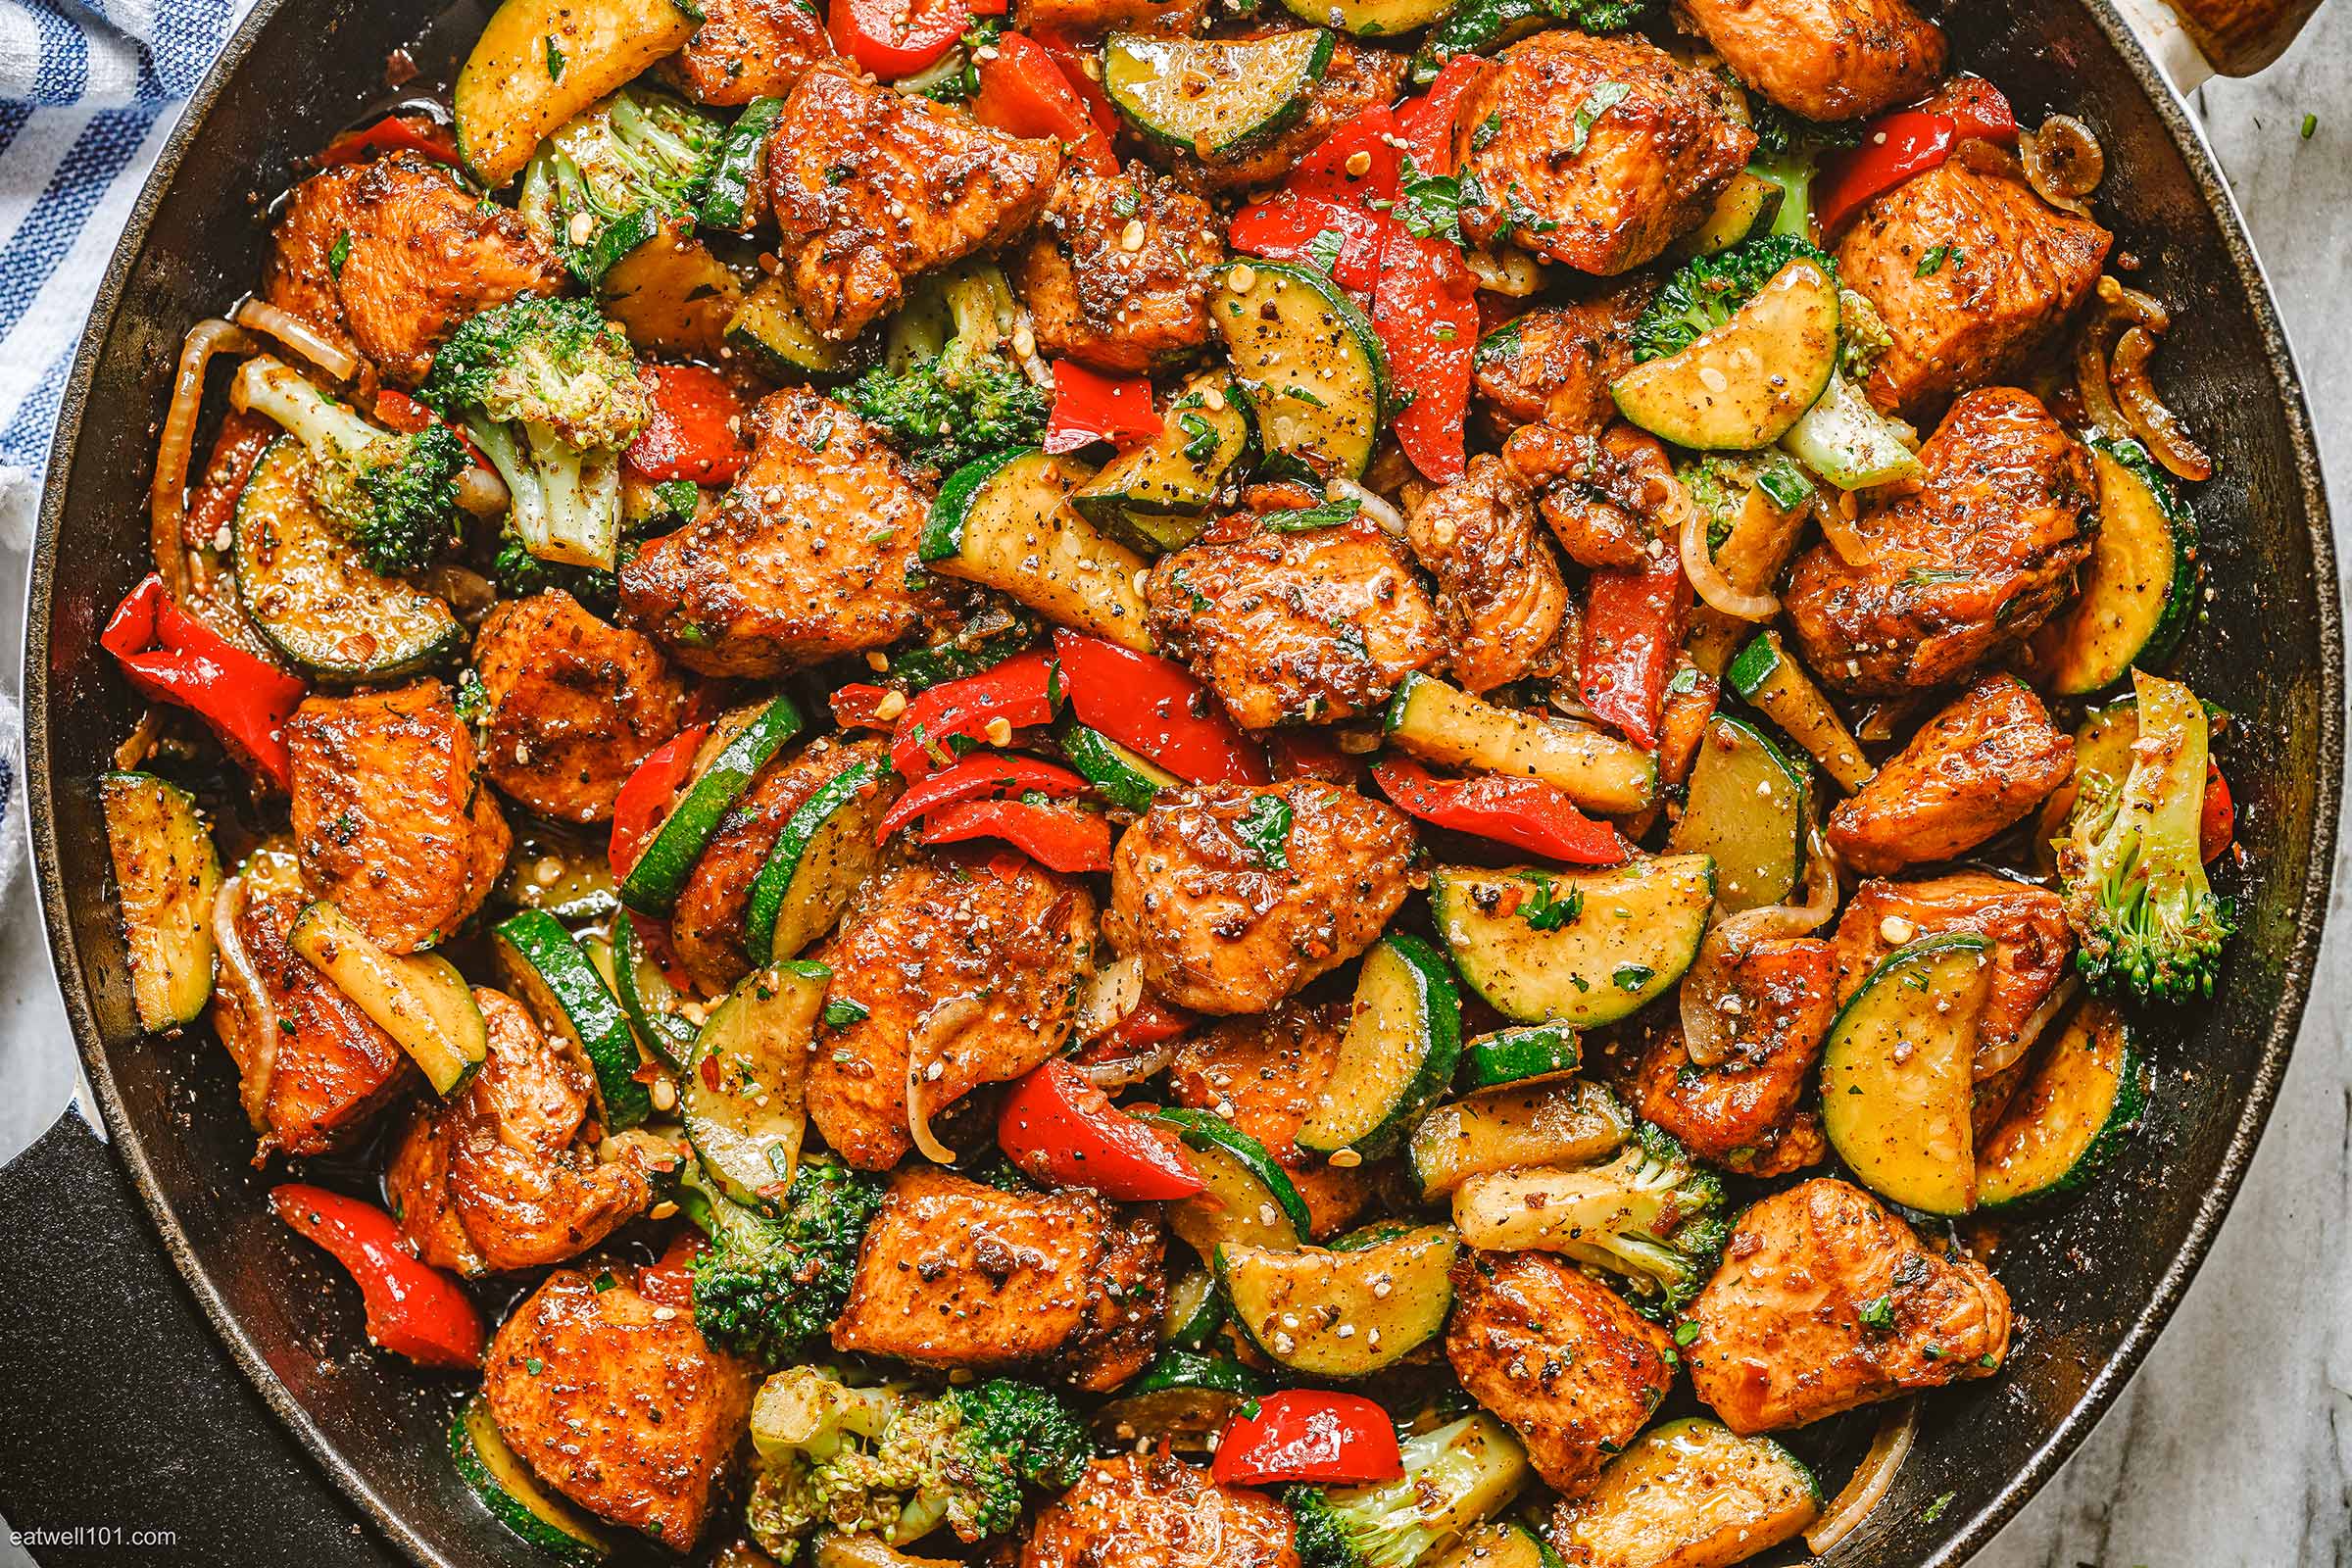 60+ One-Pan Keto Meals For Dinner {Quick and Easy}